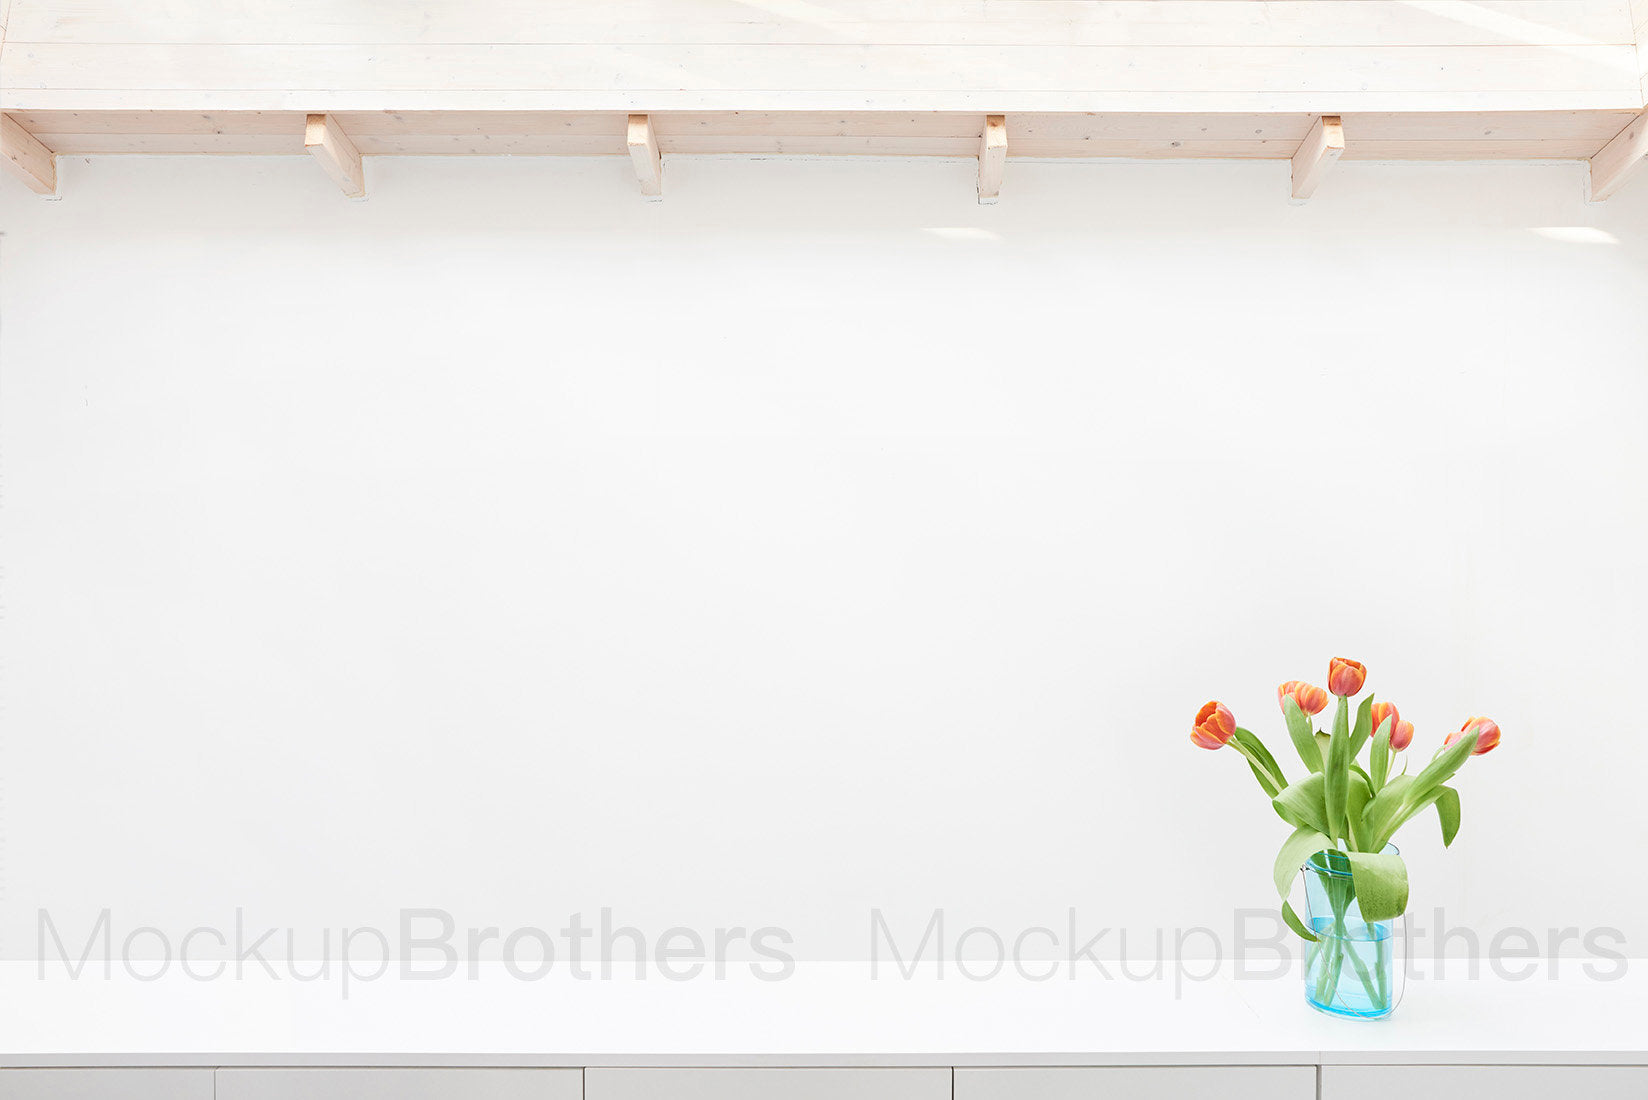 Wall mockup for large paintings with tulips by MockupBrothers